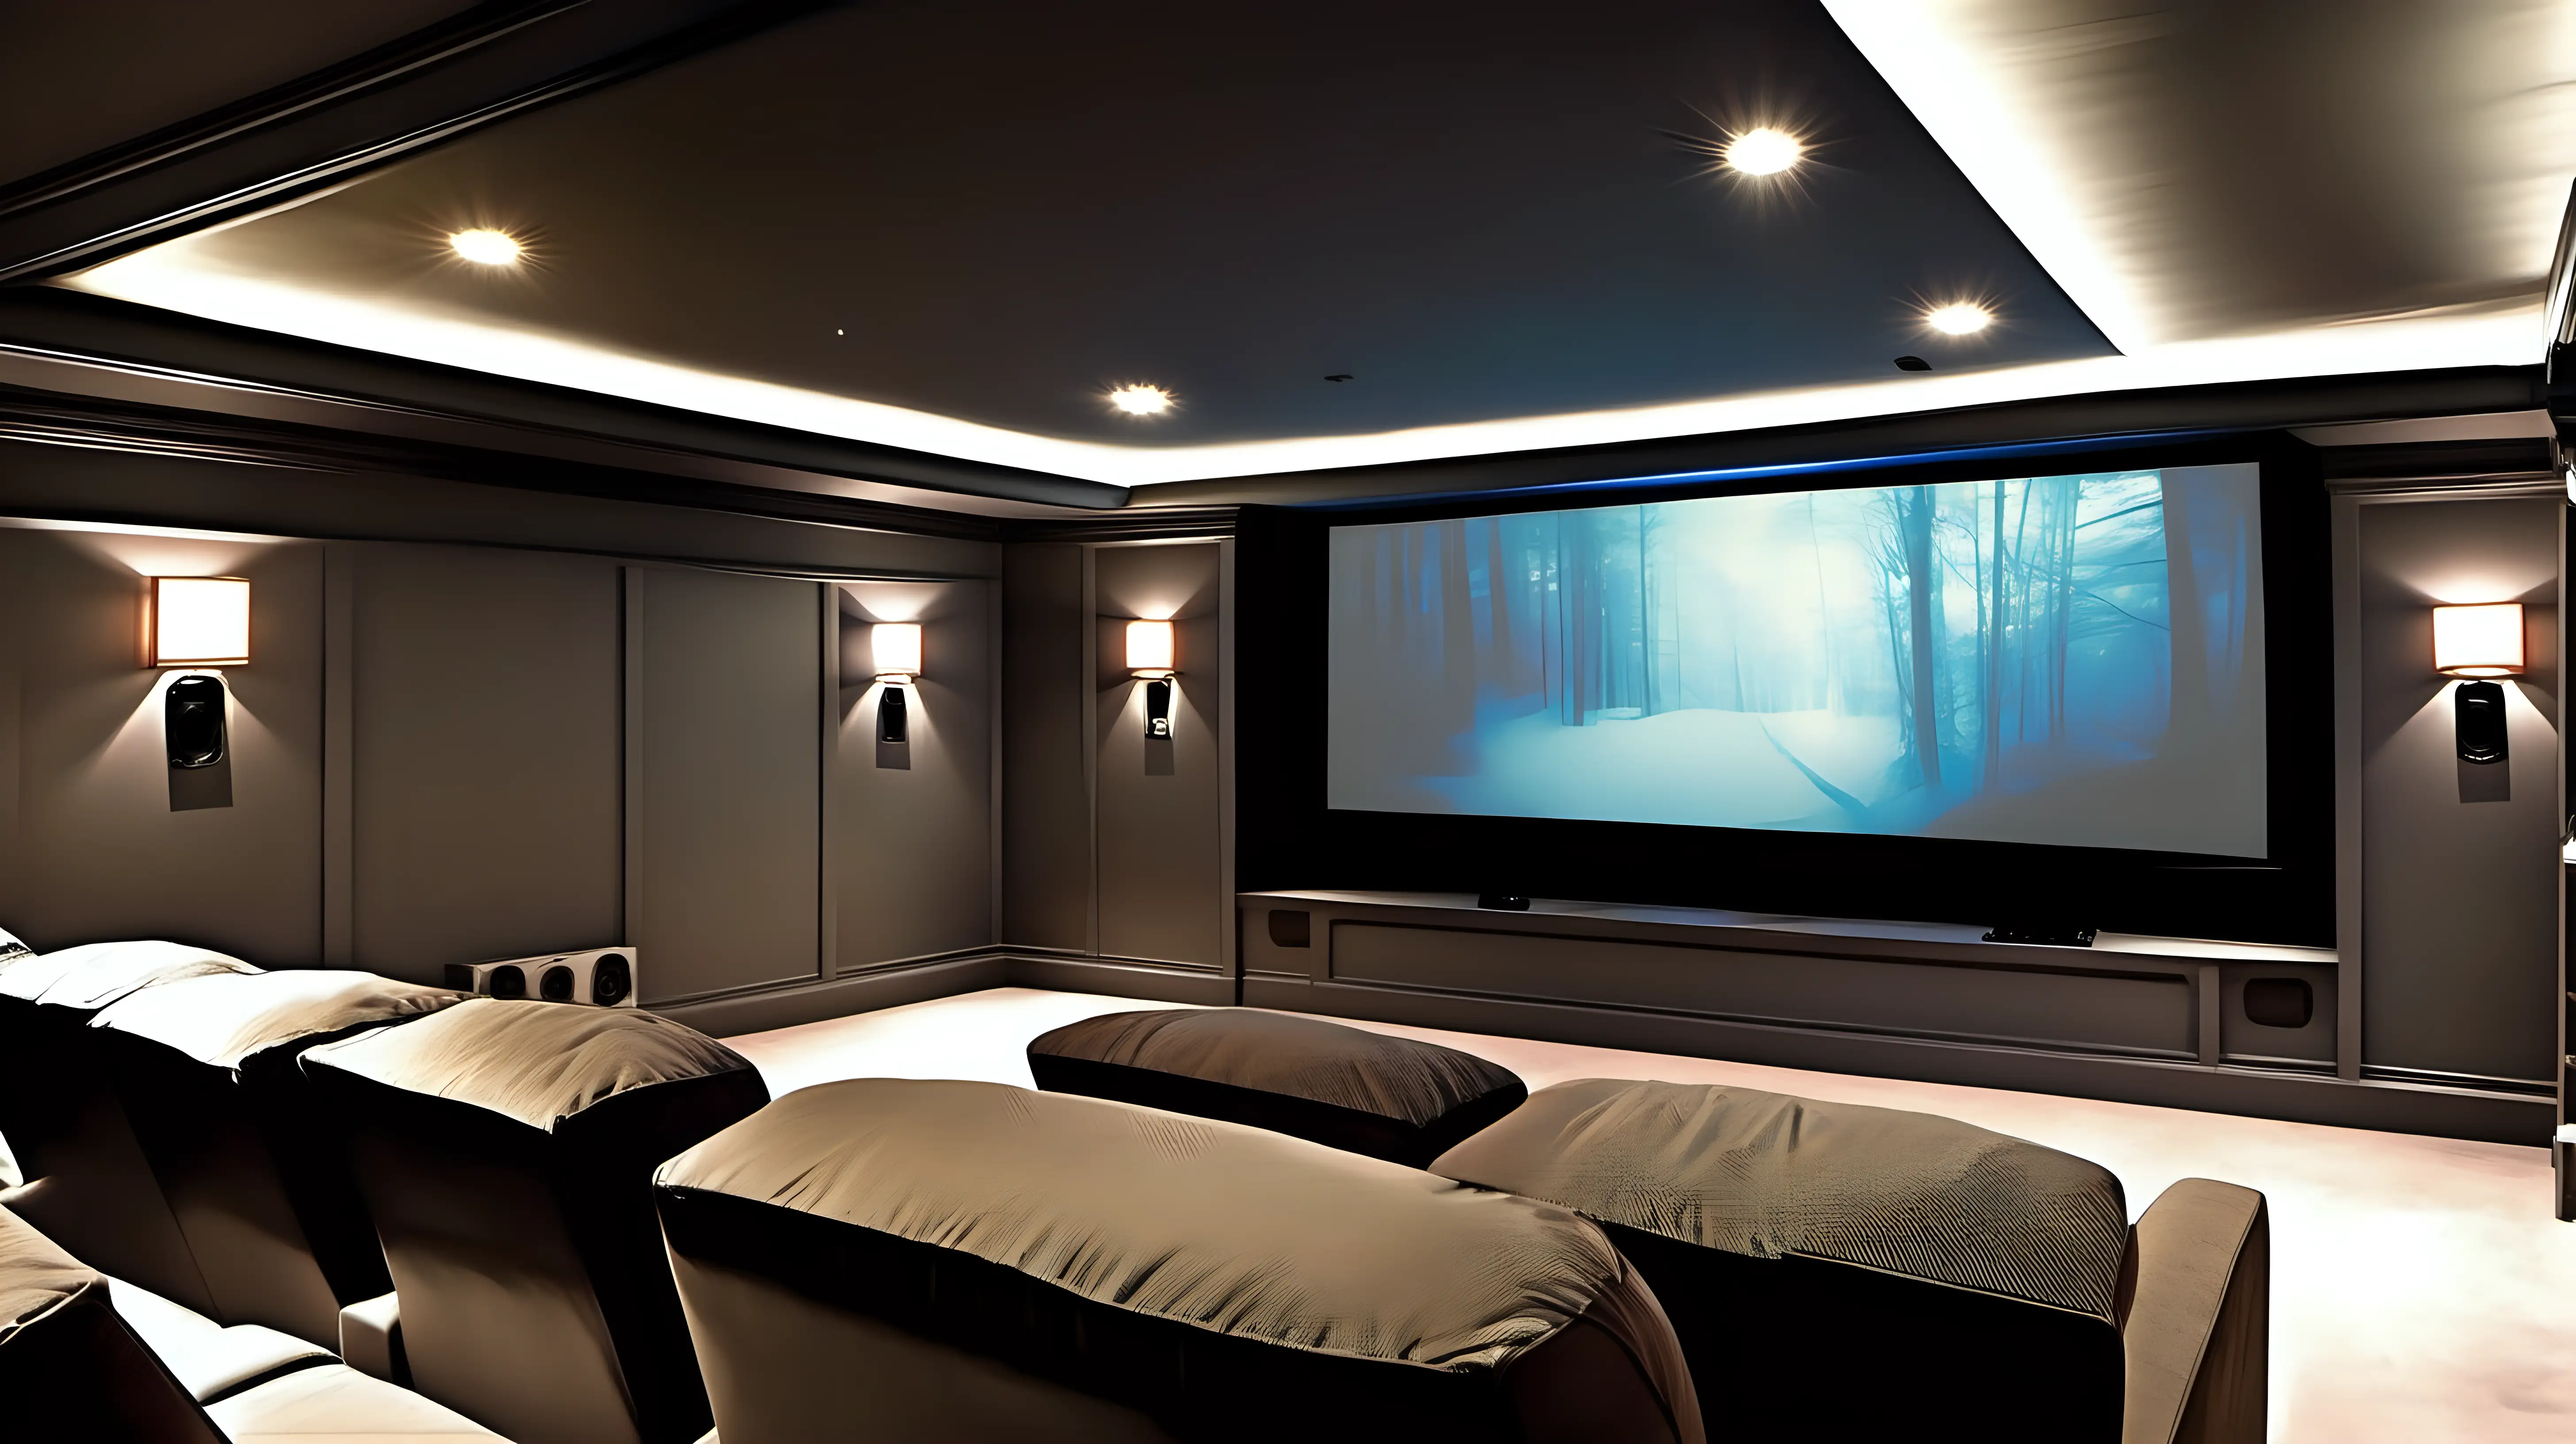 A modern and inviting home theater with comfortable seating, a large screen, and ambient lighting.